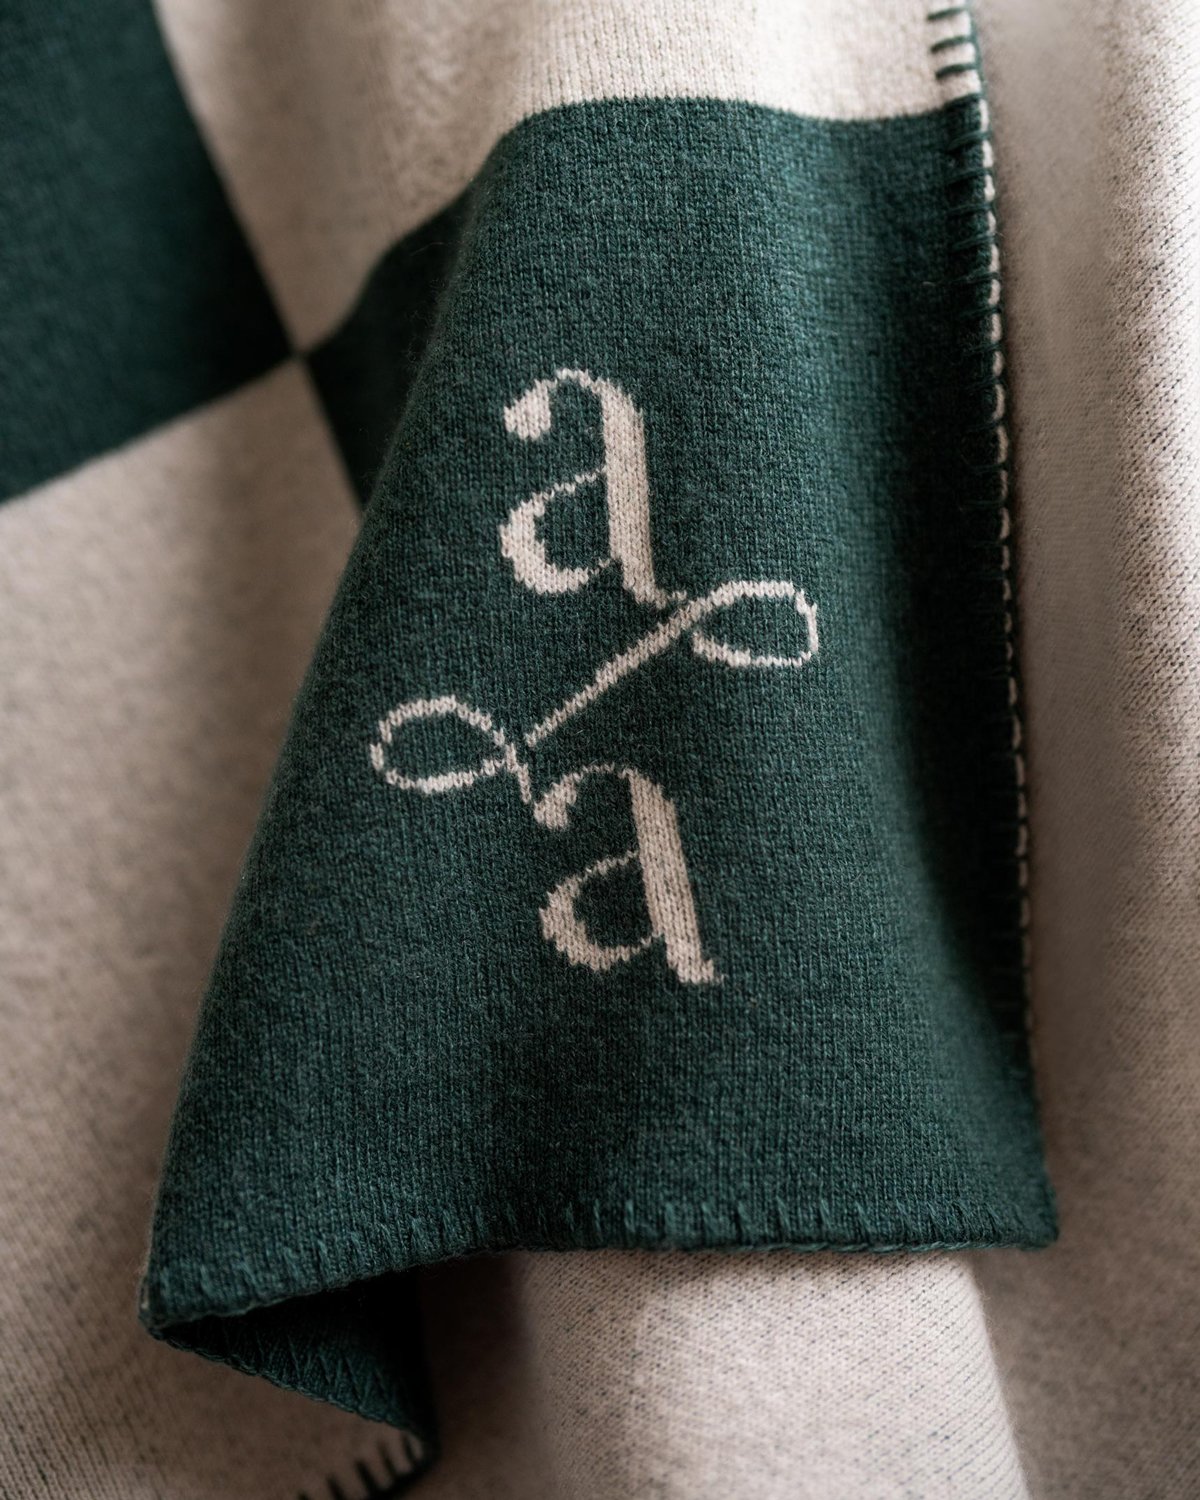 Designed and monogrammed Atria touchpoint. A green and white checkered blanket with visible seams and a script logo